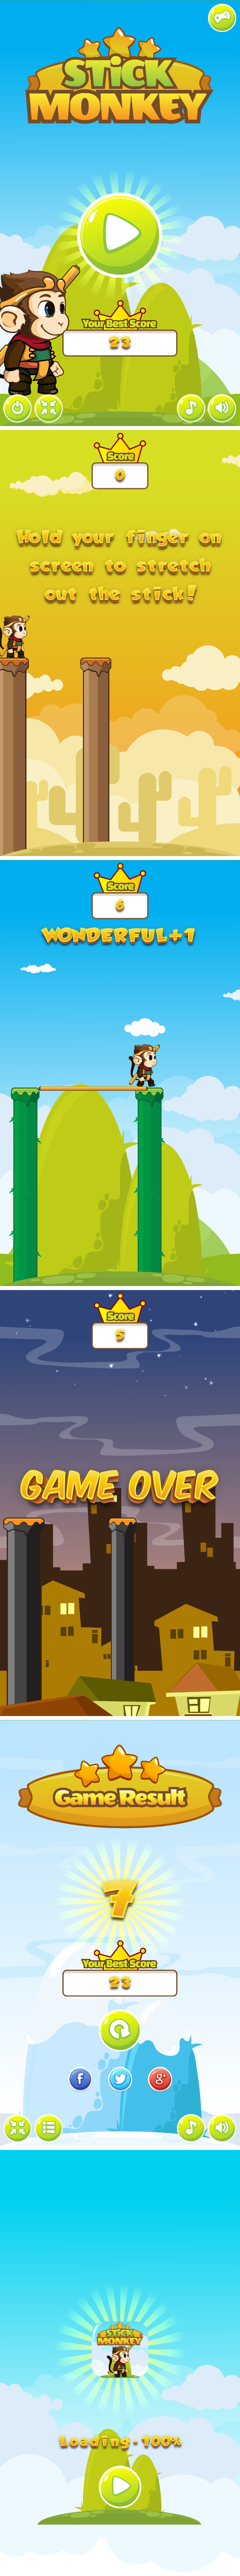 Stick Monkey - HTML5 Game + Mobile Version! (Construct 3 | Construct 2 | Capx) - 3